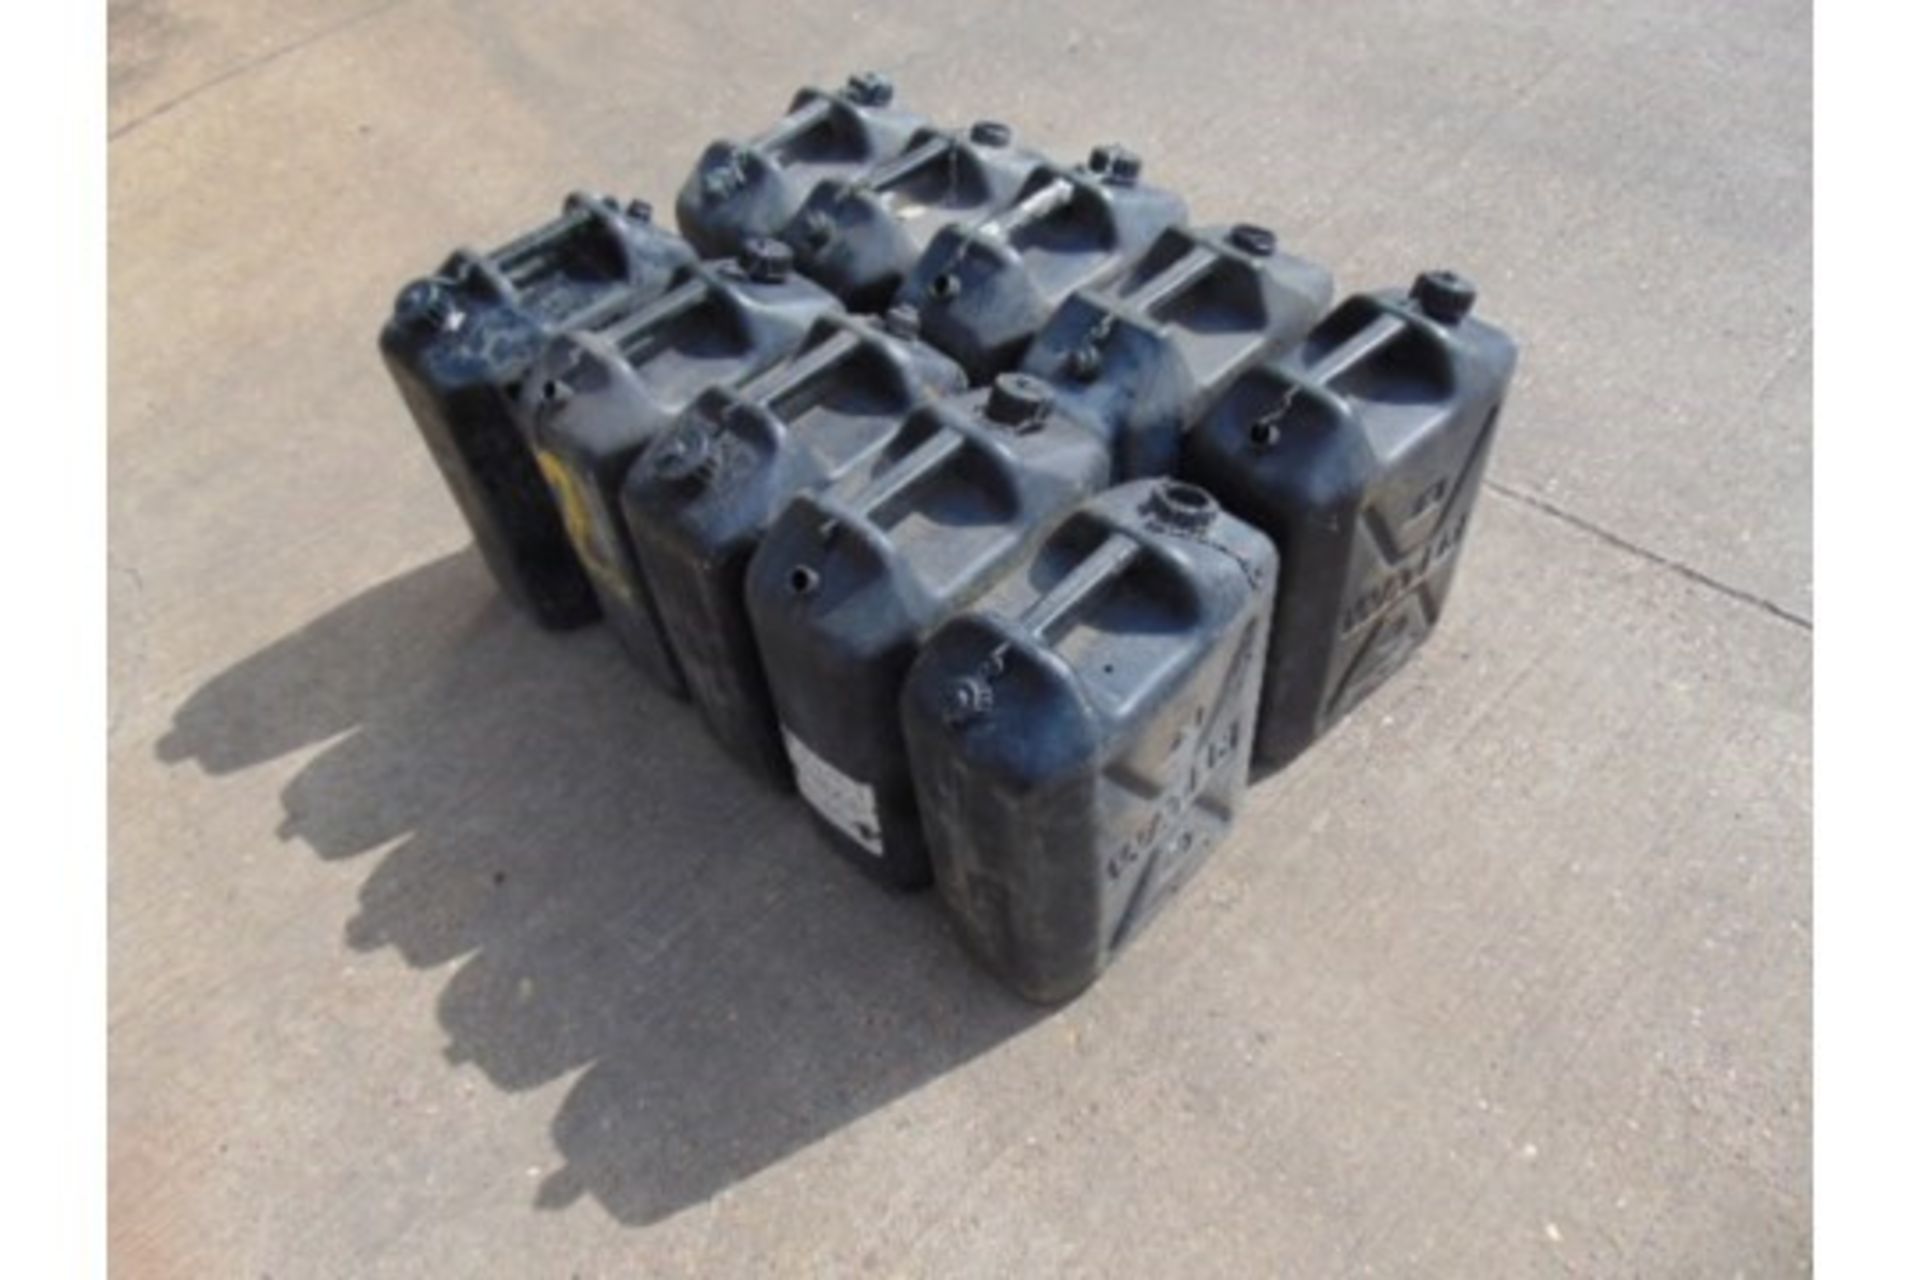 10 x Issued Water Containers